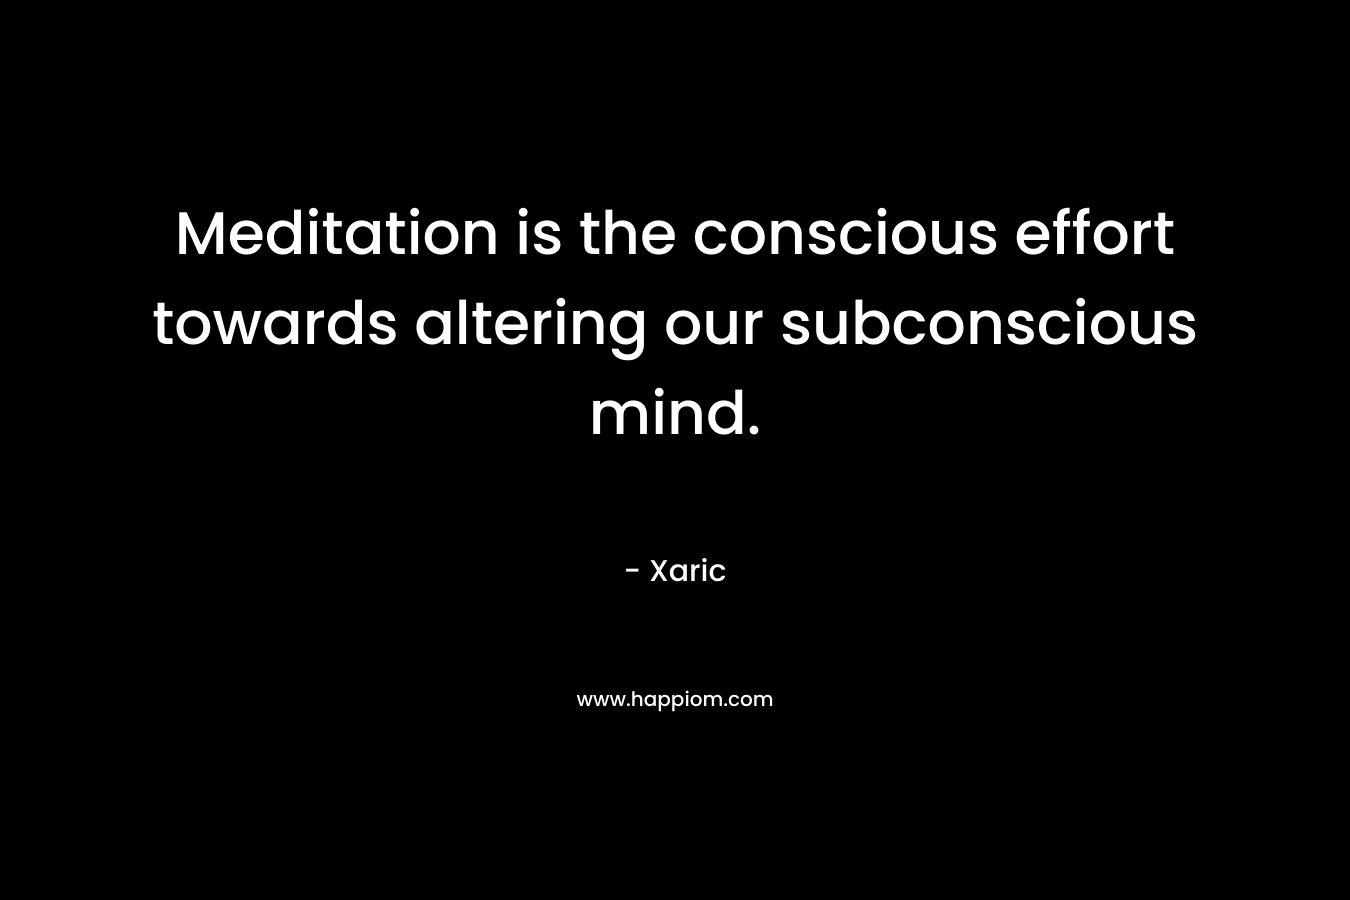 Meditation is the conscious effort towards altering our subconscious mind.